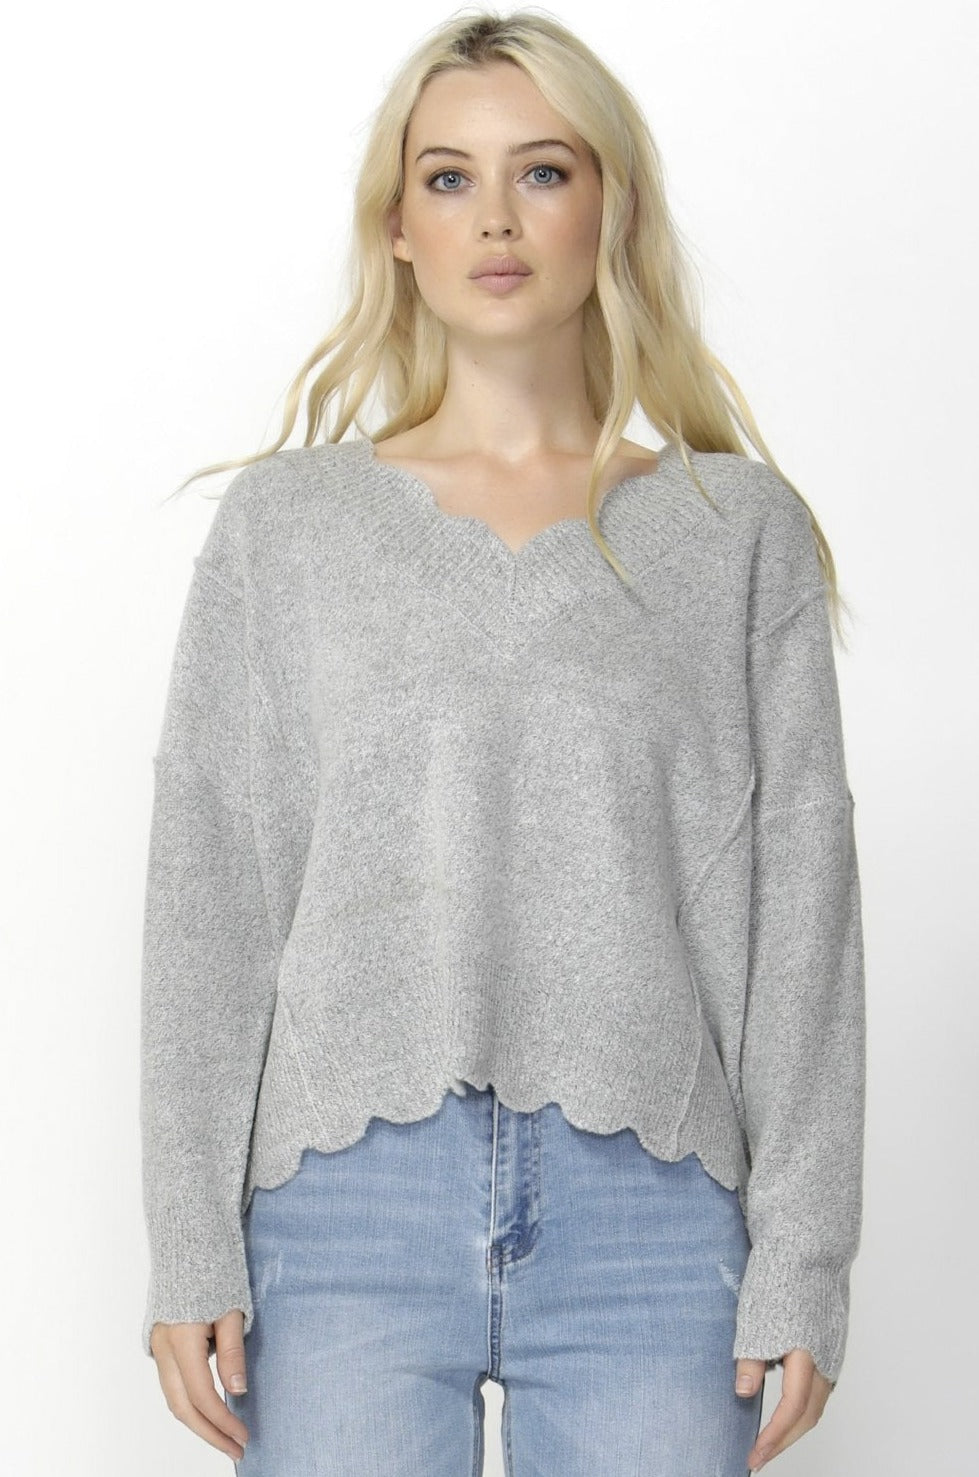 Sass Out of My Mind Scallop Knit in Grey - Hey Sara